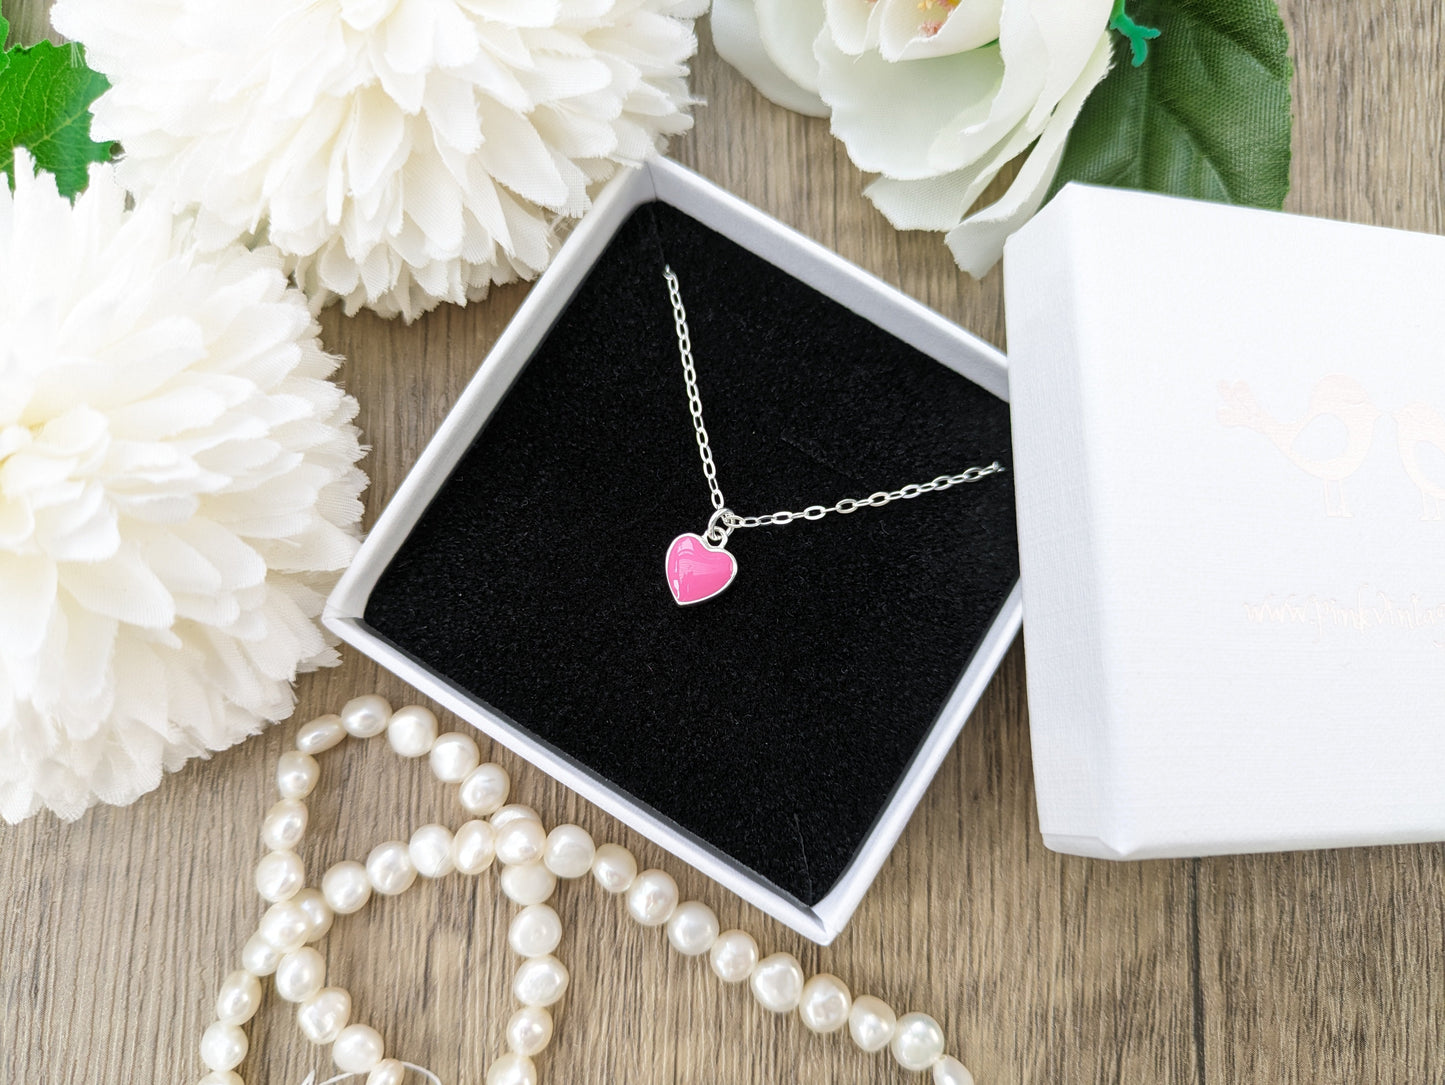 Mother and daughter necklace. Save 10% when you buy 2+.